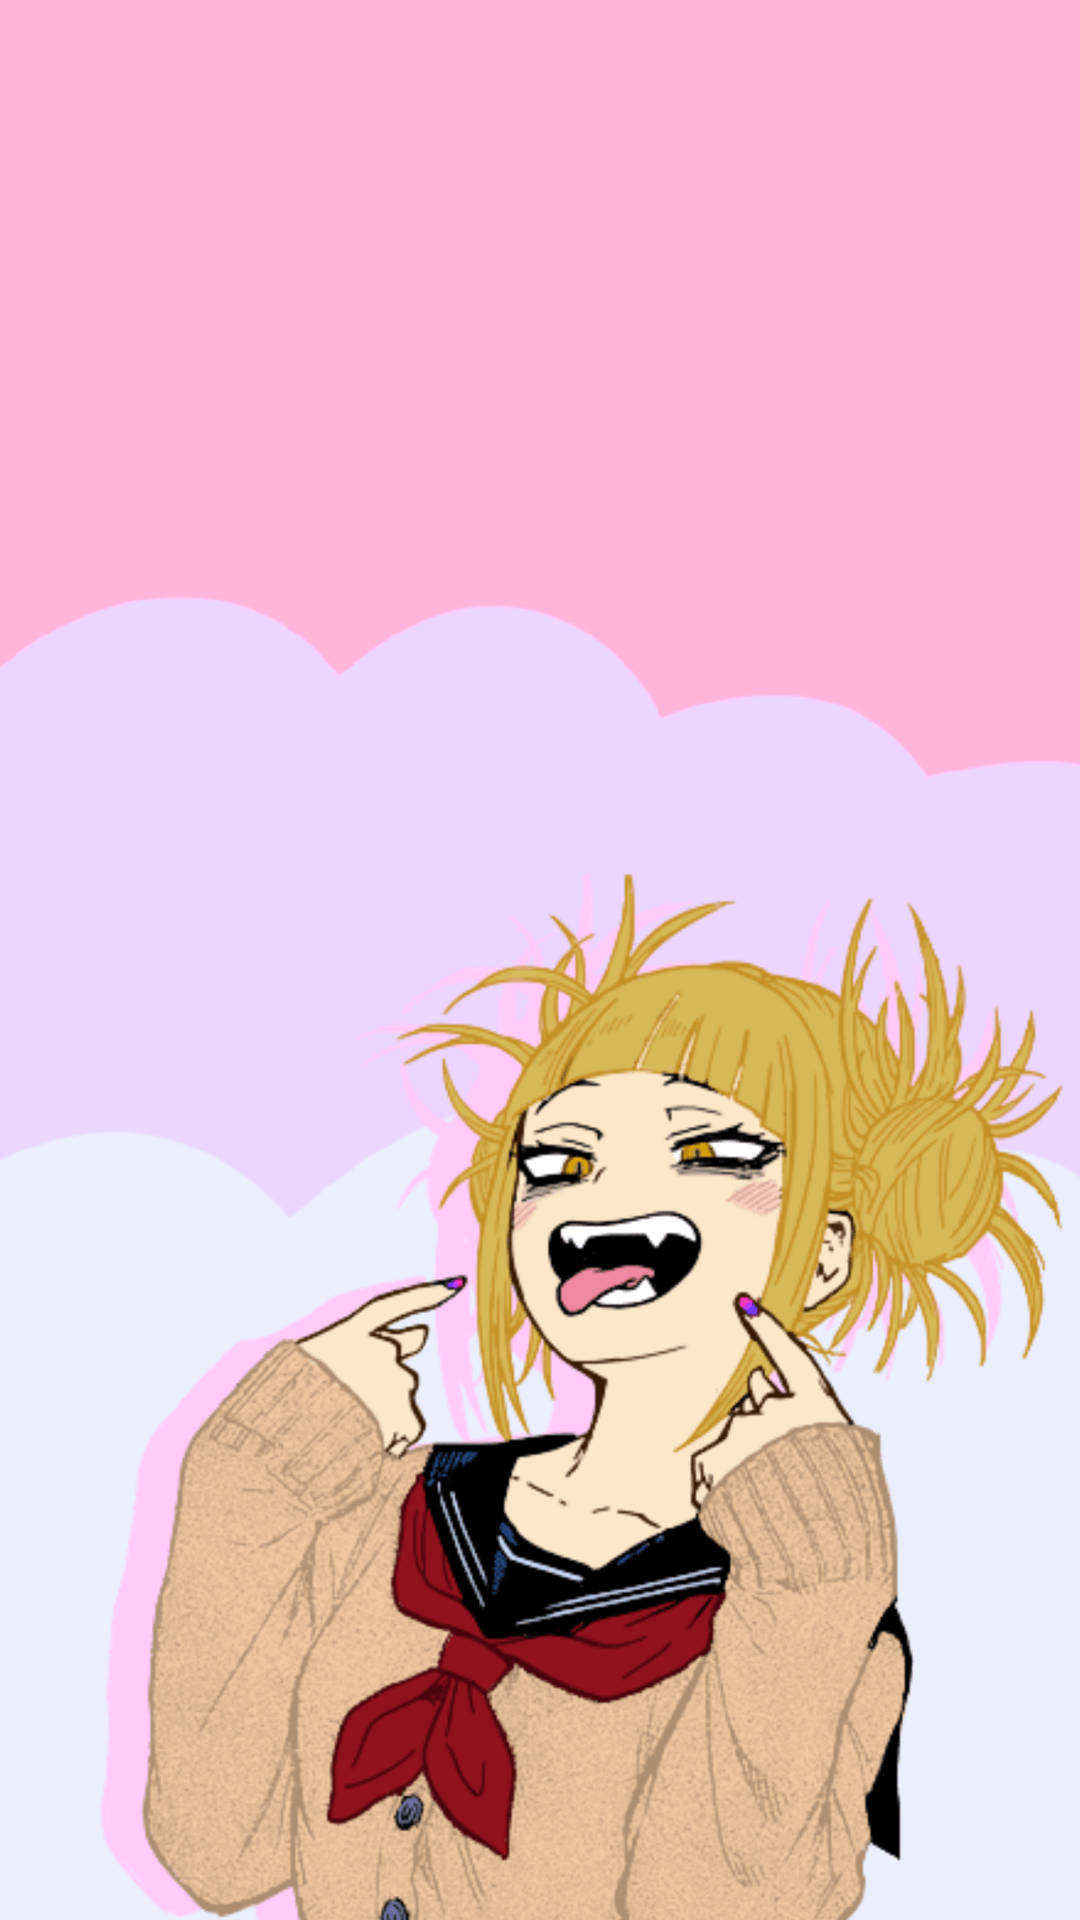 Fun Quirky Himiko Toga Background